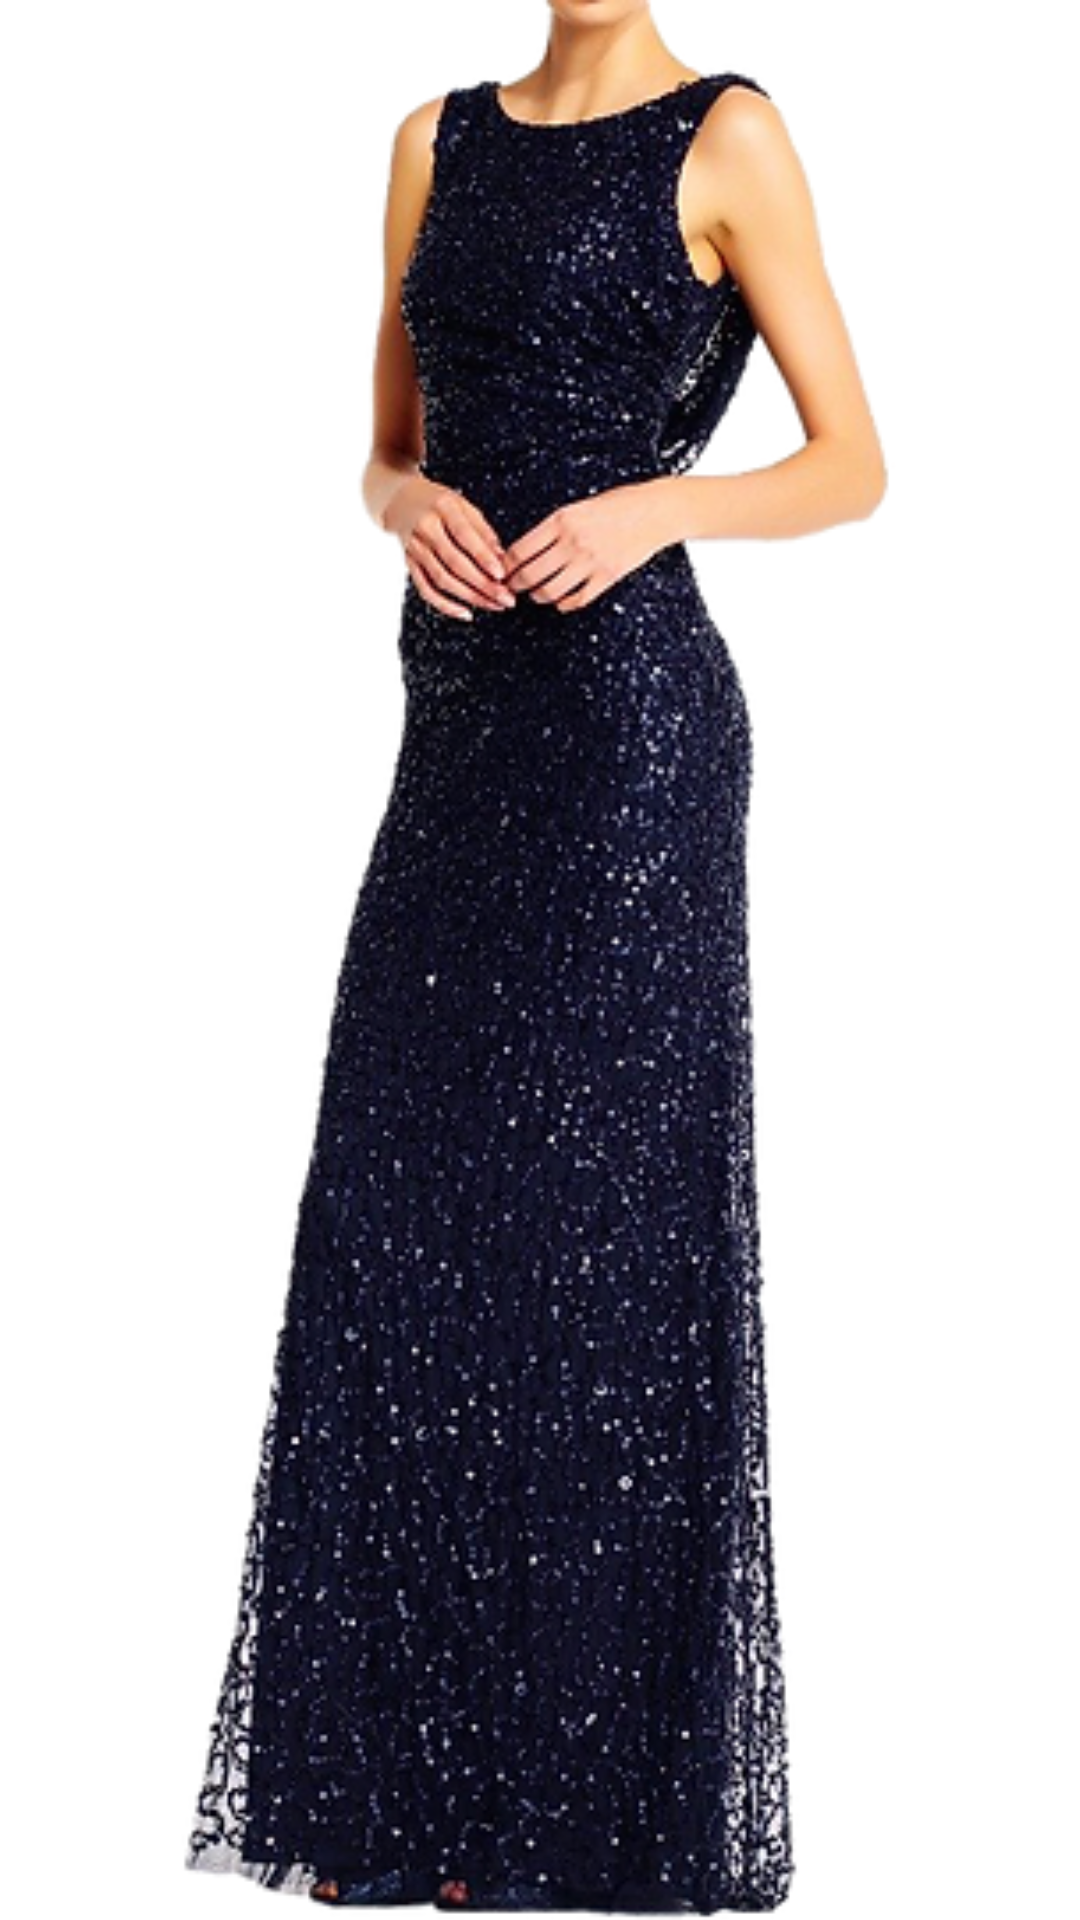 Adrianna Papell Natalia Sequined Cowl Back Gown in Navy